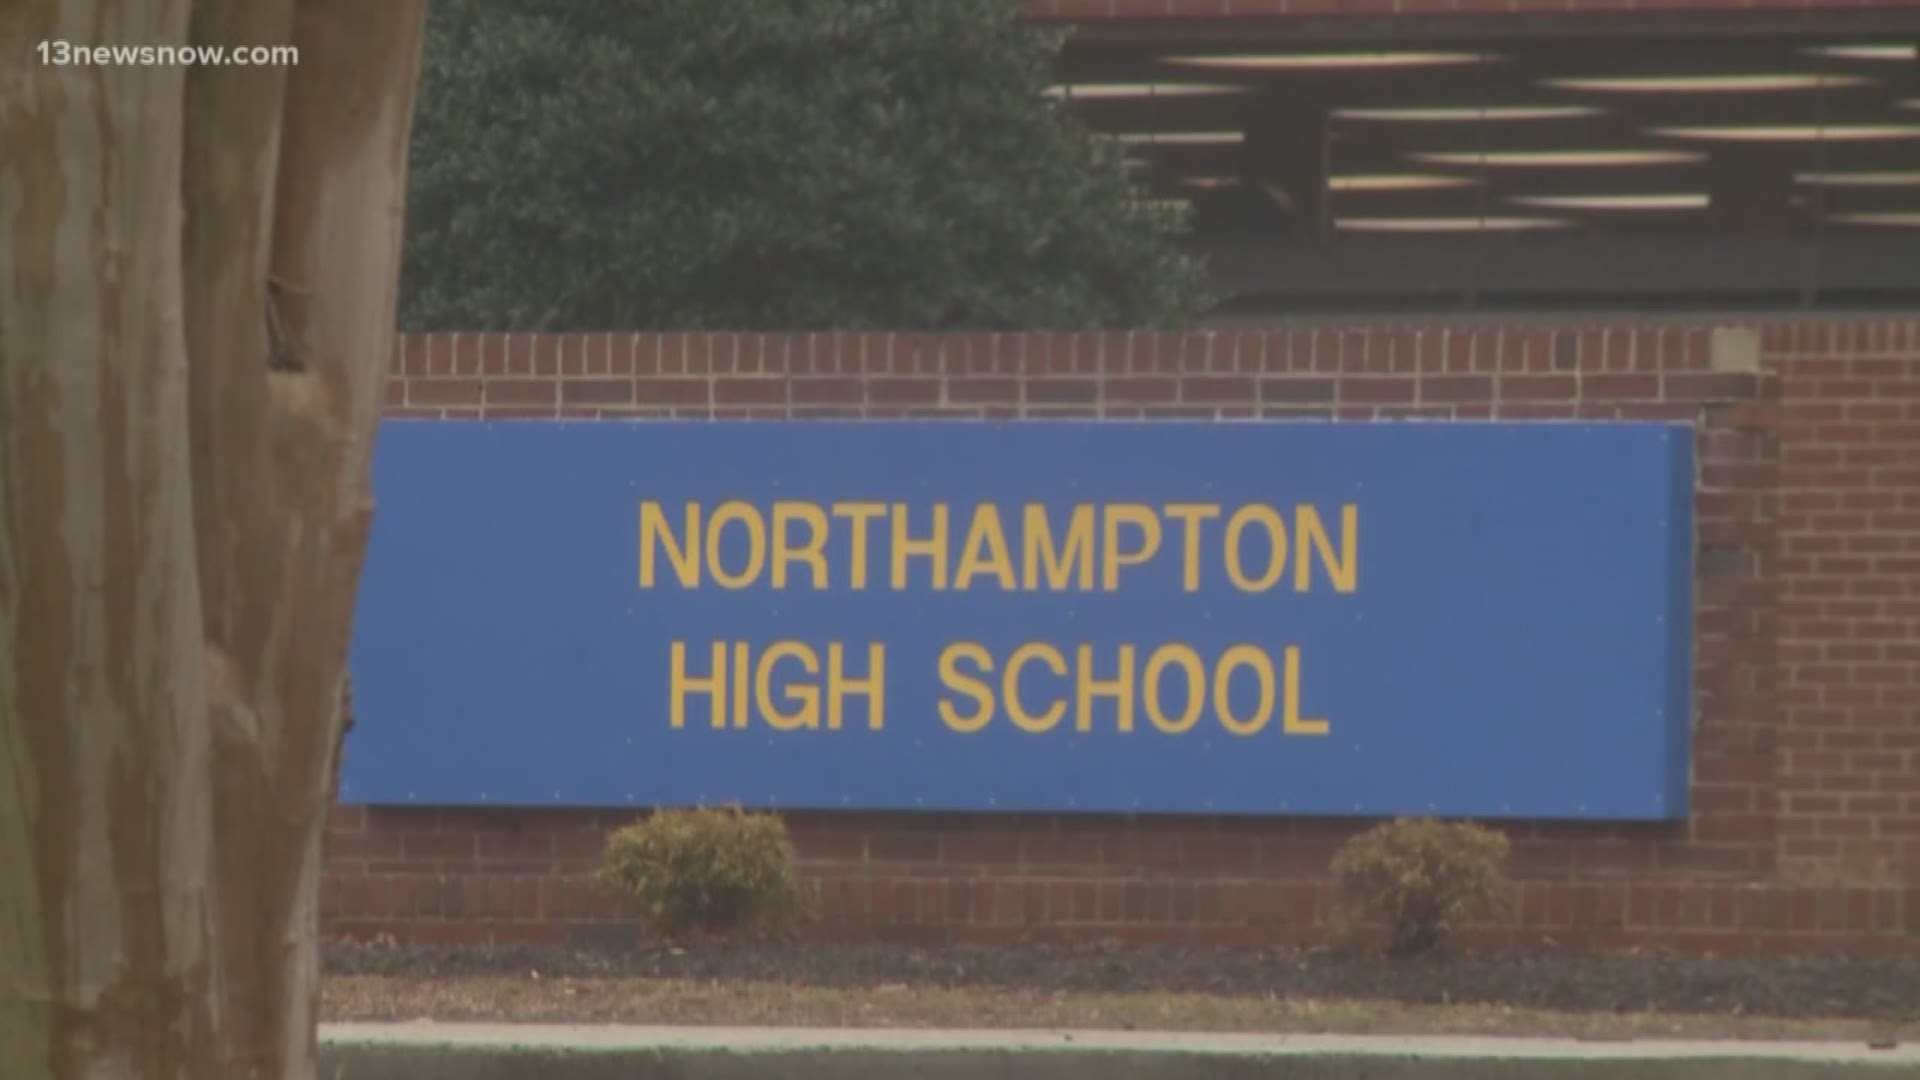 According to the Northampton County Sheriff's Office, a student at Northampton High School sexually assaulted another student on school grounds during school hours.